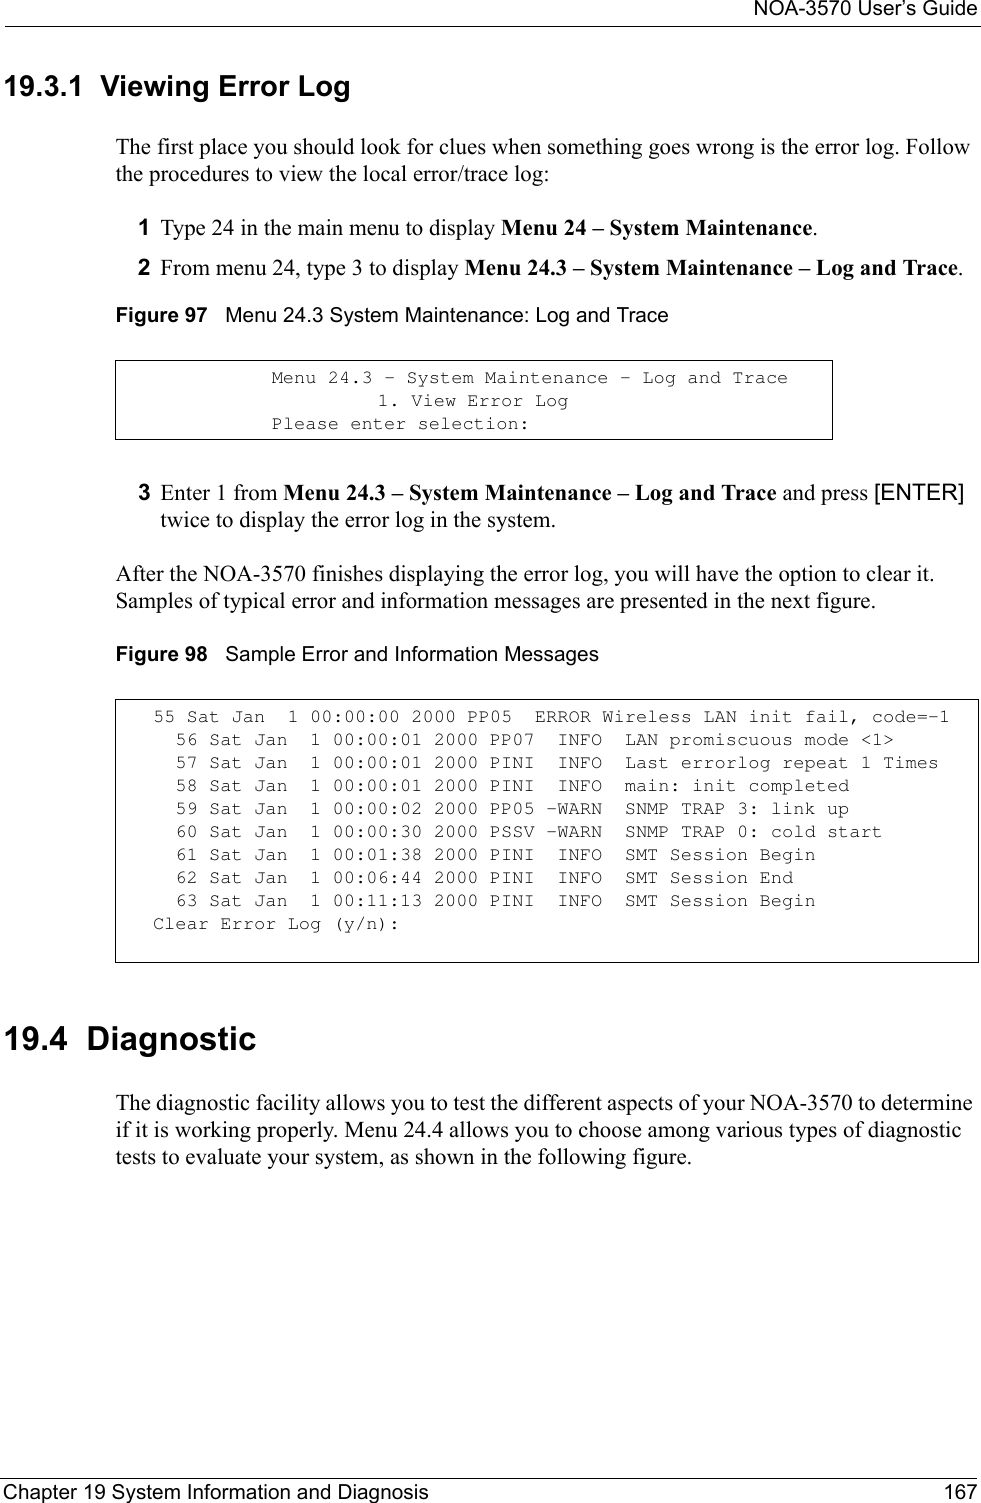 NOA-3570 User’s GuideChapter 19 System Information and Diagnosis 16719.3.1  Viewing Error LogThe first place you should look for clues when something goes wrong is the error log. Follow the procedures to view the local error/trace log:1Type 24 in the main menu to display Menu 24 – System Maintenance.2From menu 24, type 3 to display Menu 24.3 – System Maintenance – Log and Trace.Figure 97   Menu 24.3 System Maintenance: Log and Trace3Enter 1 from Menu 24.3 – System Maintenance – Log and Trace and press [ENTER] twice to display the error log in the system.After the NOA-3570 finishes displaying the error log, you will have the option to clear it. Samples of typical error and information messages are presented in the next figure.Figure 98   Sample Error and Information Messages19.4  DiagnosticThe diagnostic facility allows you to test the different aspects of your NOA-3570 to determine if it is working properly. Menu 24.4 allows you to choose among various types of diagnostic tests to evaluate your system, as shown in the following figure.Menu 24.3 - System Maintenance - Log and Trace                    1. View Error LogPlease enter selection:55 Sat Jan  1 00:00:00 2000 PP05  ERROR Wireless LAN init fail, code=-1  56 Sat Jan  1 00:00:01 2000 PP07  INFO  LAN promiscuous mode &lt;1&gt;  57 Sat Jan  1 00:00:01 2000 PINI  INFO  Last errorlog repeat 1 Times  58 Sat Jan  1 00:00:01 2000 PINI  INFO  main: init completed  59 Sat Jan  1 00:00:02 2000 PP05 -WARN  SNMP TRAP 3: link up  60 Sat Jan  1 00:00:30 2000 PSSV -WARN  SNMP TRAP 0: cold start  61 Sat Jan  1 00:01:38 2000 PINI  INFO  SMT Session Begin  62 Sat Jan  1 00:06:44 2000 PINI  INFO  SMT Session End  63 Sat Jan  1 00:11:13 2000 PINI  INFO  SMT Session BeginClear Error Log (y/n):